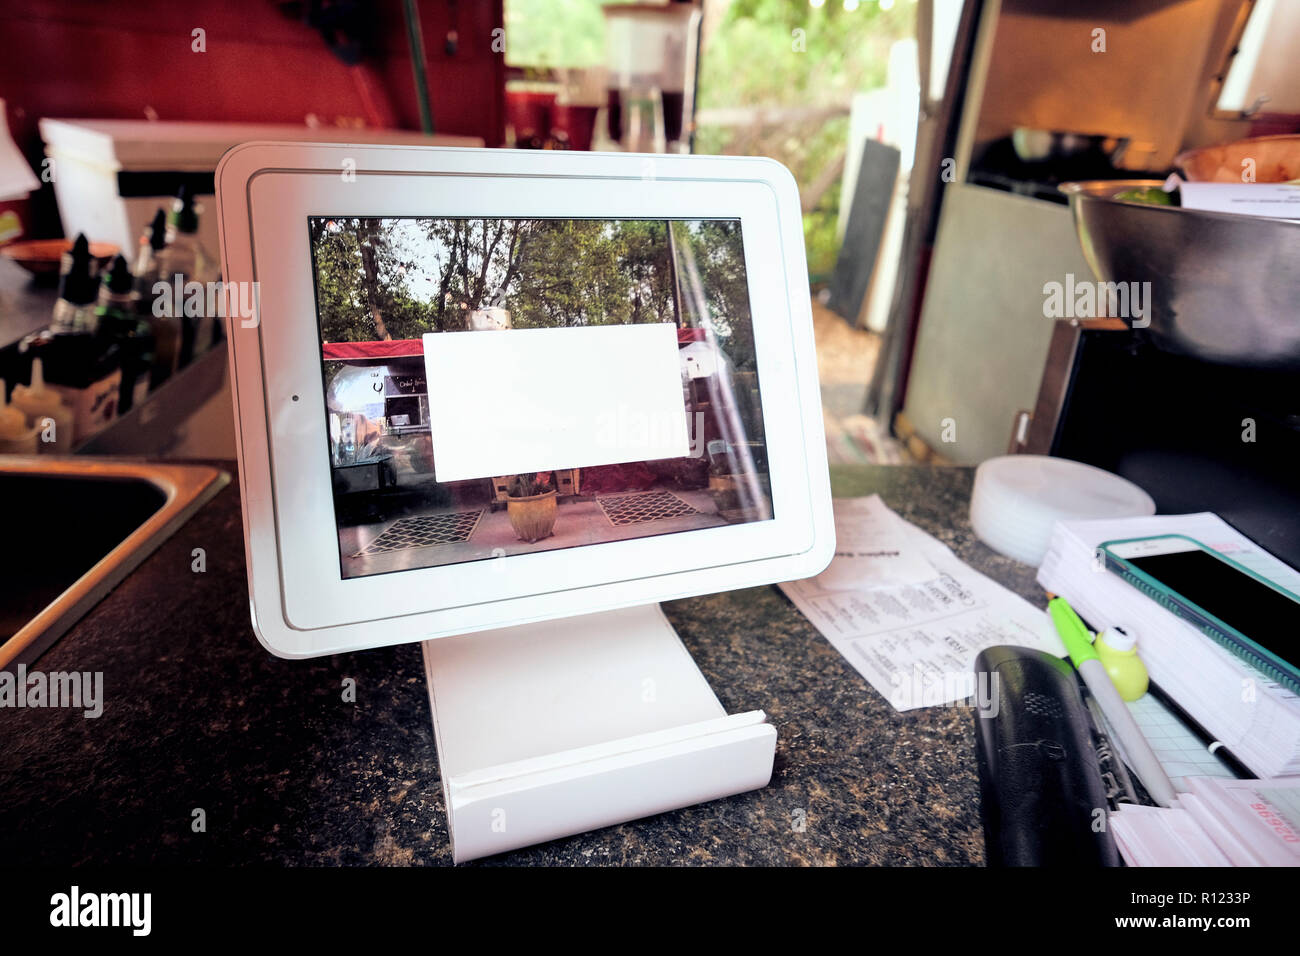 Digital screen for food orders and payment at eatery Stock Photo